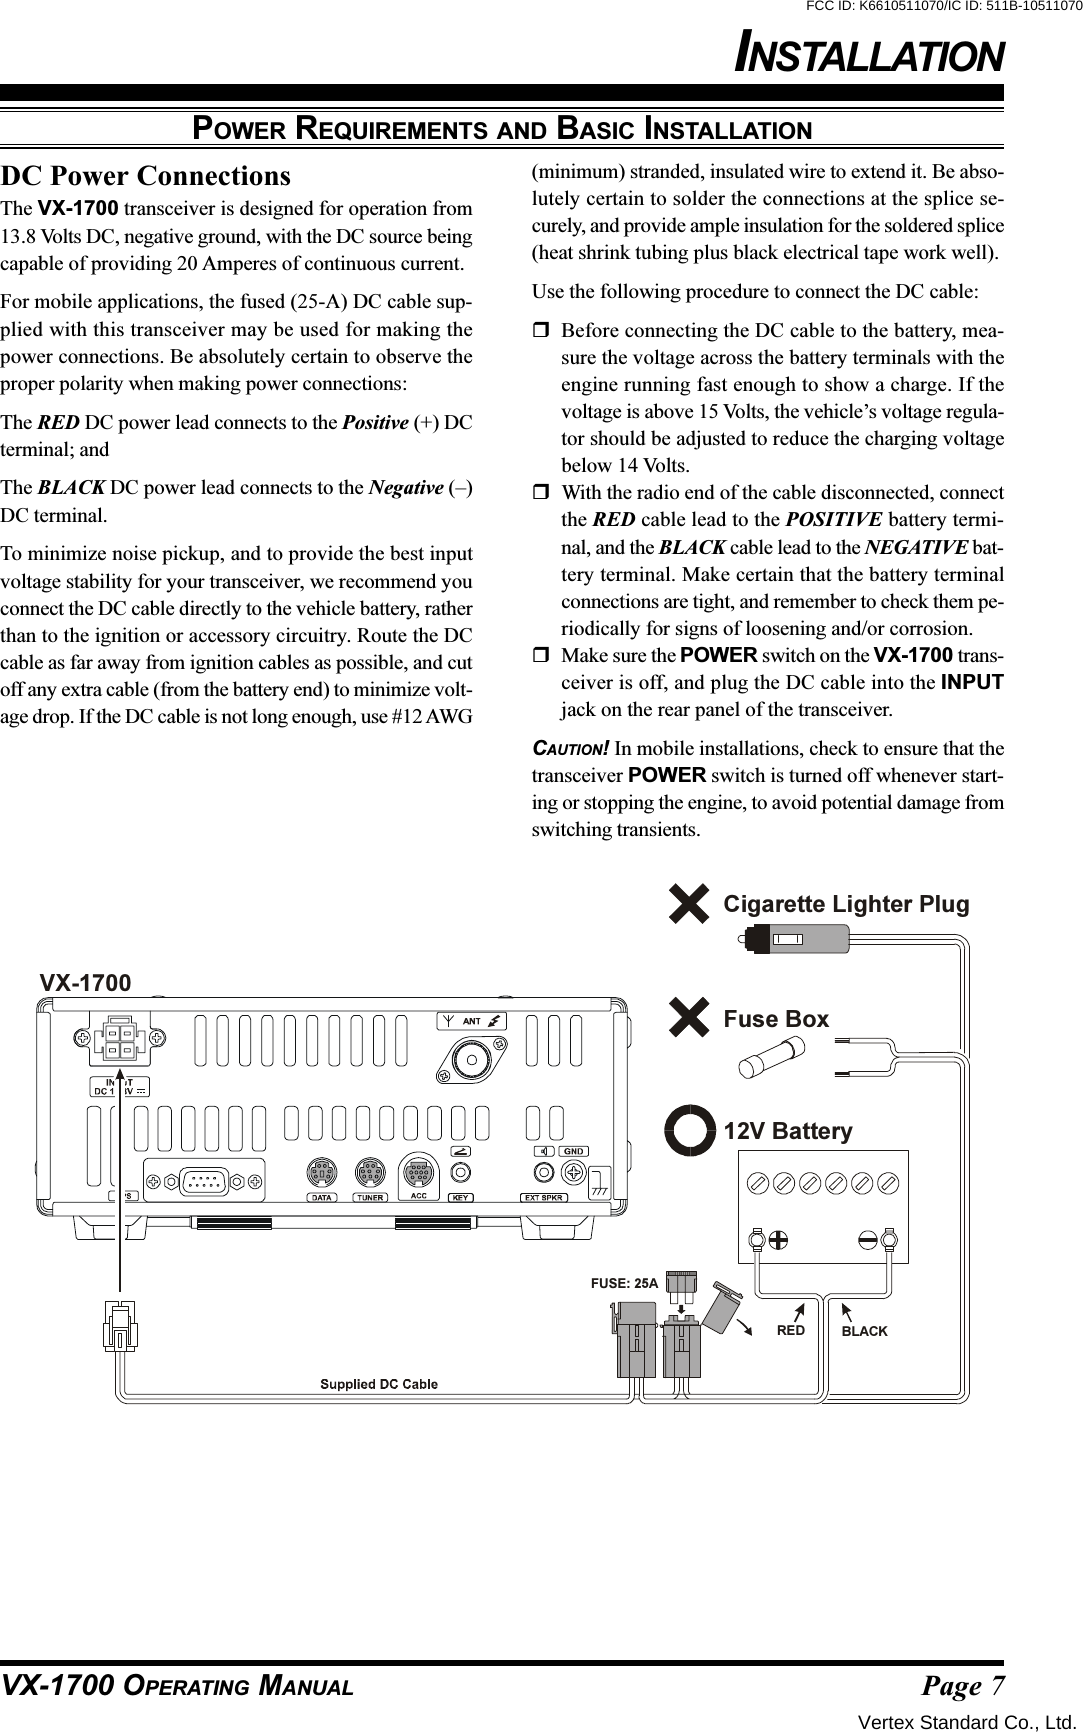 Page 7VX-1700 OPERATING MANUALPOWER REQUIREMENTS AND BASIC INSTALLATIONDC Power ConnectionsThe VX-1700 transceiver is designed for operation from13.8 Volts DC, negative ground, with the DC source beingcapable of providing 20 Amperes of continuous current.For mobile applications, the fused (25-A) DC cable sup-plied with this transceiver may be used for making thepower connections. Be absolutely certain to observe theproper polarity when making power connections:The RED DC power lead connects to the Positive (+) DCterminal; andThe BLACK DC power lead connects to the Negative (–)DC terminal.To minimize noise pickup, and to provide the best inputvoltage stability for your transceiver, we recommend youconnect the DC cable directly to the vehicle battery, ratherthan to the ignition or accessory circuitry. Route the DCcable as far away from ignition cables as possible, and cutoff any extra cable (from the battery end) to minimize volt-age drop. If the DC cable is not long enough, use #12 AWG(minimum) stranded, insulated wire to extend it. Be abso-lutely certain to solder the connections at the splice se-curely, and provide ample insulation for the soldered splice(heat shrink tubing plus black electrical tape work well).Use the following procedure to connect the DC cable:Before connecting the DC cable to the battery, mea-sure the voltage across the battery terminals with theengine running fast enough to show a charge. If thevoltage is above 15 Volts, the vehicle’s voltage regula-tor should be adjusted to reduce the charging voltagebelow 14 Volts.With the radio end of the cable disconnected, connectthe RED cable lead to the POSITIVE battery termi-nal, and the BLACK cable lead to the NEGATIVE bat-tery terminal. Make certain that the battery terminalconnections are tight, and remember to check them pe-riodically for signs of loosening and/or corrosion.Make sure the POWER switch on the VX-1700 trans-ceiver is off, and plug the DC cable into the INPUTjack on the rear panel of the transceiver.CAUTION! In mobile installations, check to ensure that thetransceiver POWER switch is turned off whenever start-ing or stopping the engine, to avoid potential damage fromswitching transients.12V BatteryCigarette Lighter PlugFuse BoxRED BLACKVX-1700FUSE: 25AINSTALLATIONVertex Standard Co., Ltd.FCC ID: K6610511070/IC ID: 511B-10511070